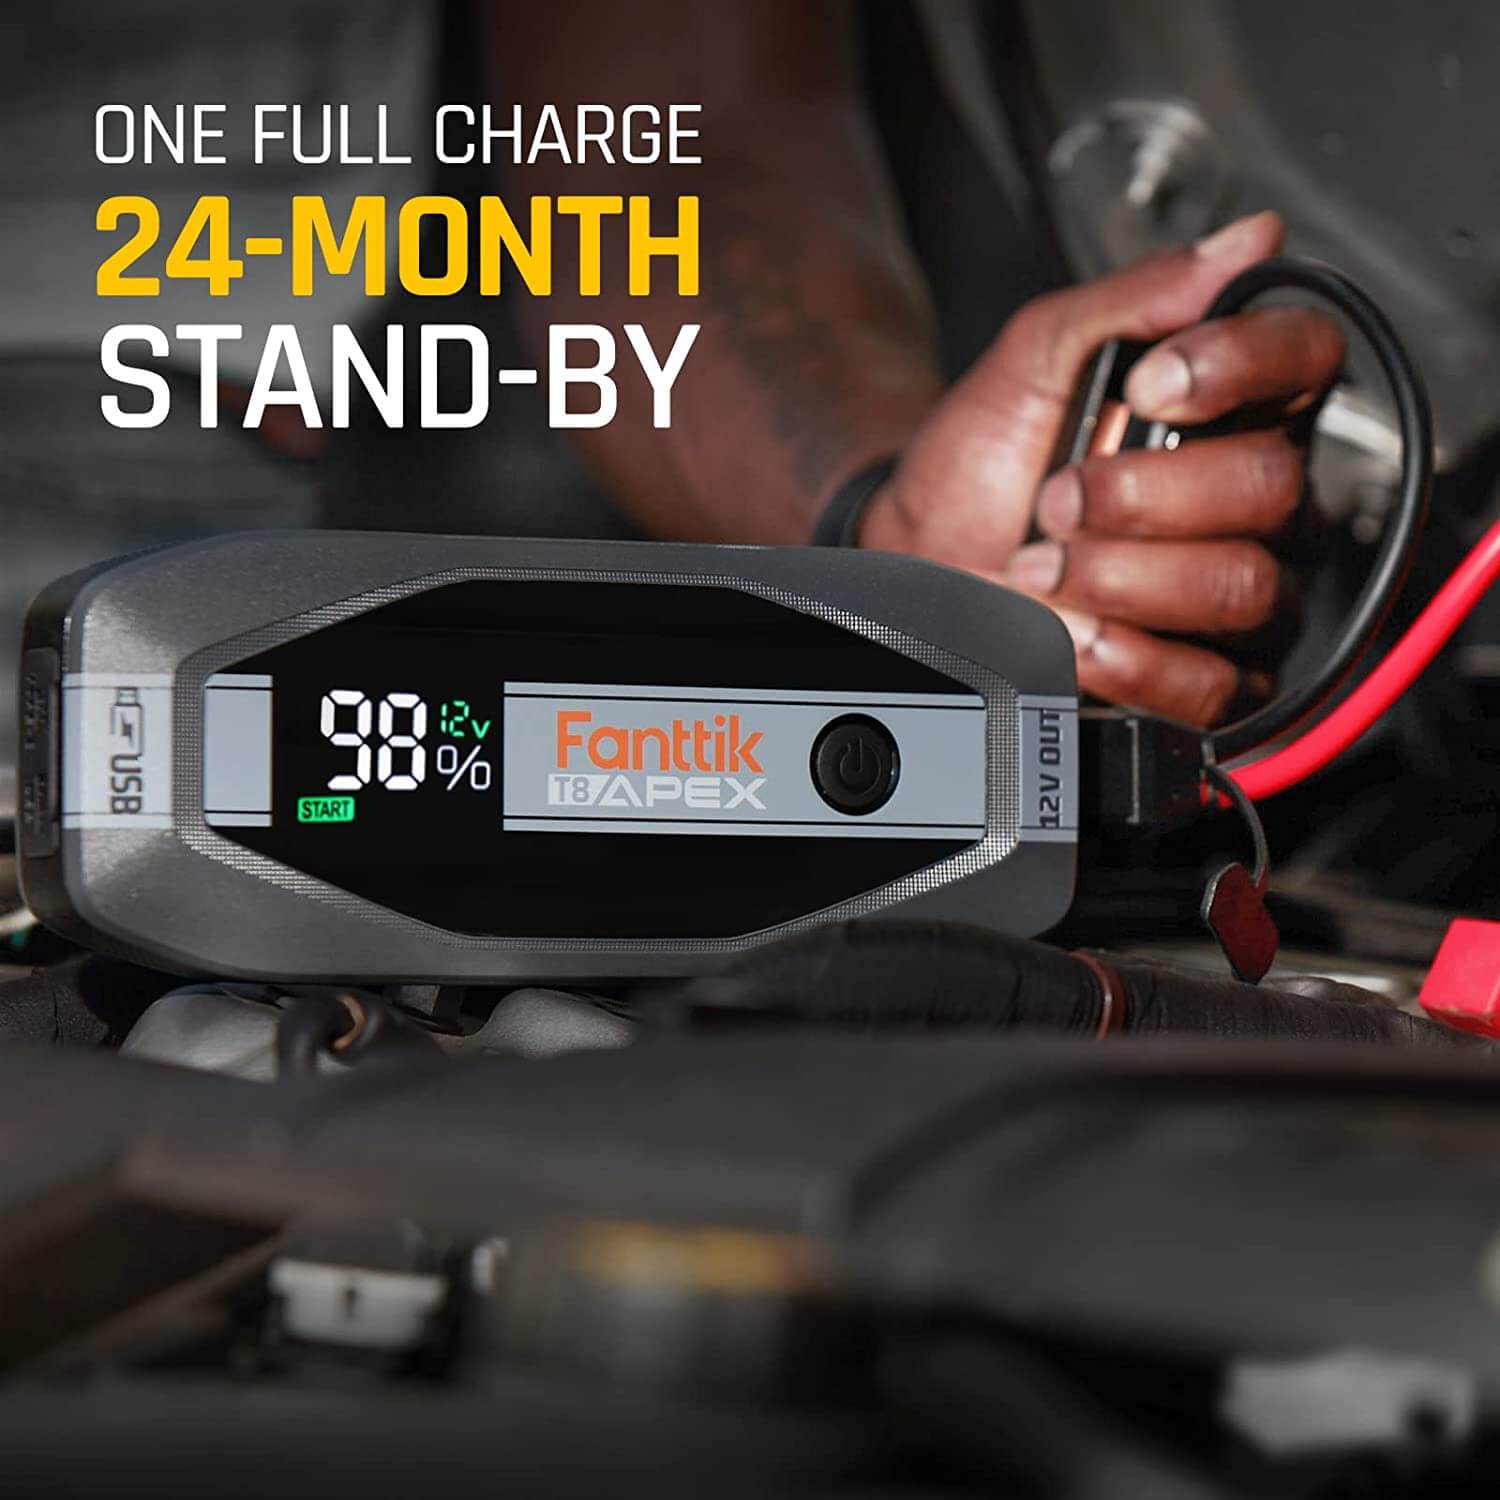 Fanttik T8 APEX 2000 Amp Jump Starter only needs 5-minutes of charge from 0% to a single jump starting for you to hit the road again immediately. With 65W USB-C power delivery input and output, the battery pack completely recharges in 1.5 hours; Also enough to power up your MacBook Pro 13’’, laptops, phones, and other USB-C devices.